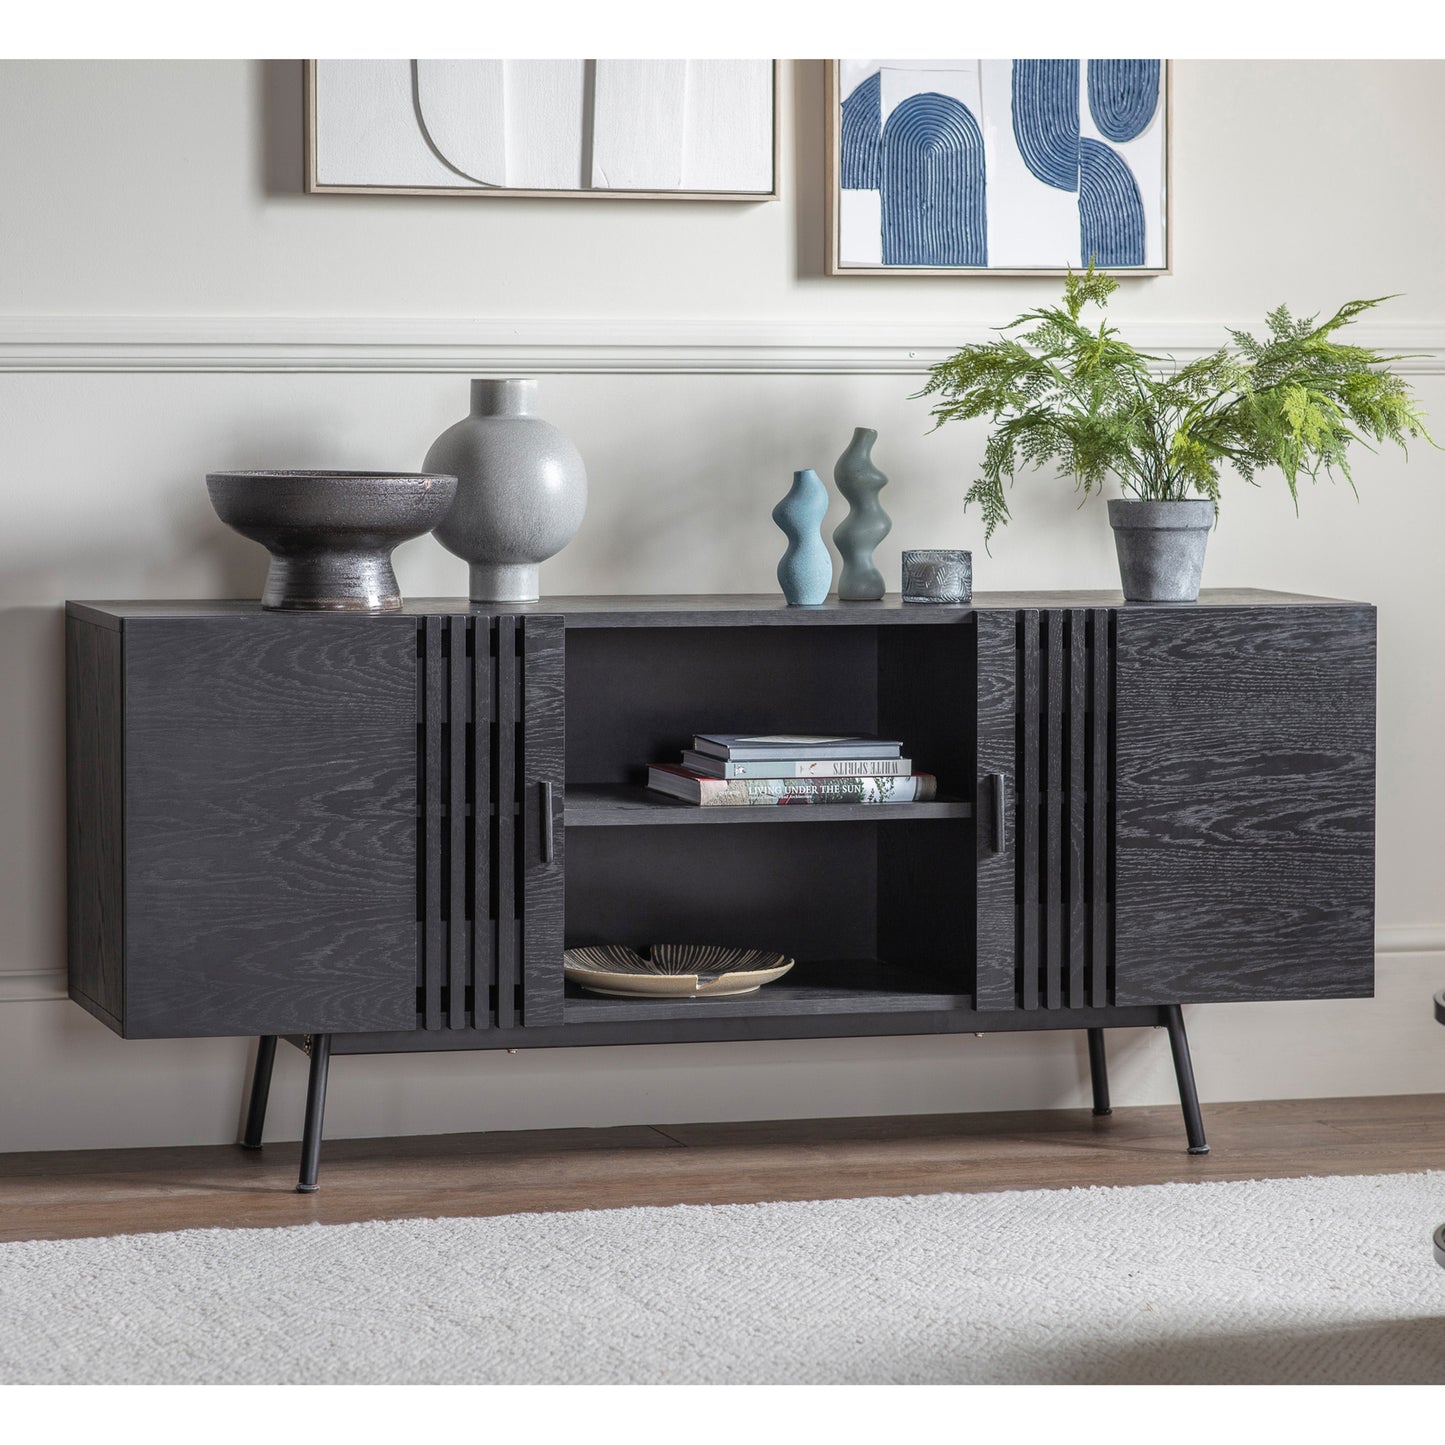 A Black Holston Sideboard with shelves and a vase on top for interior decor.